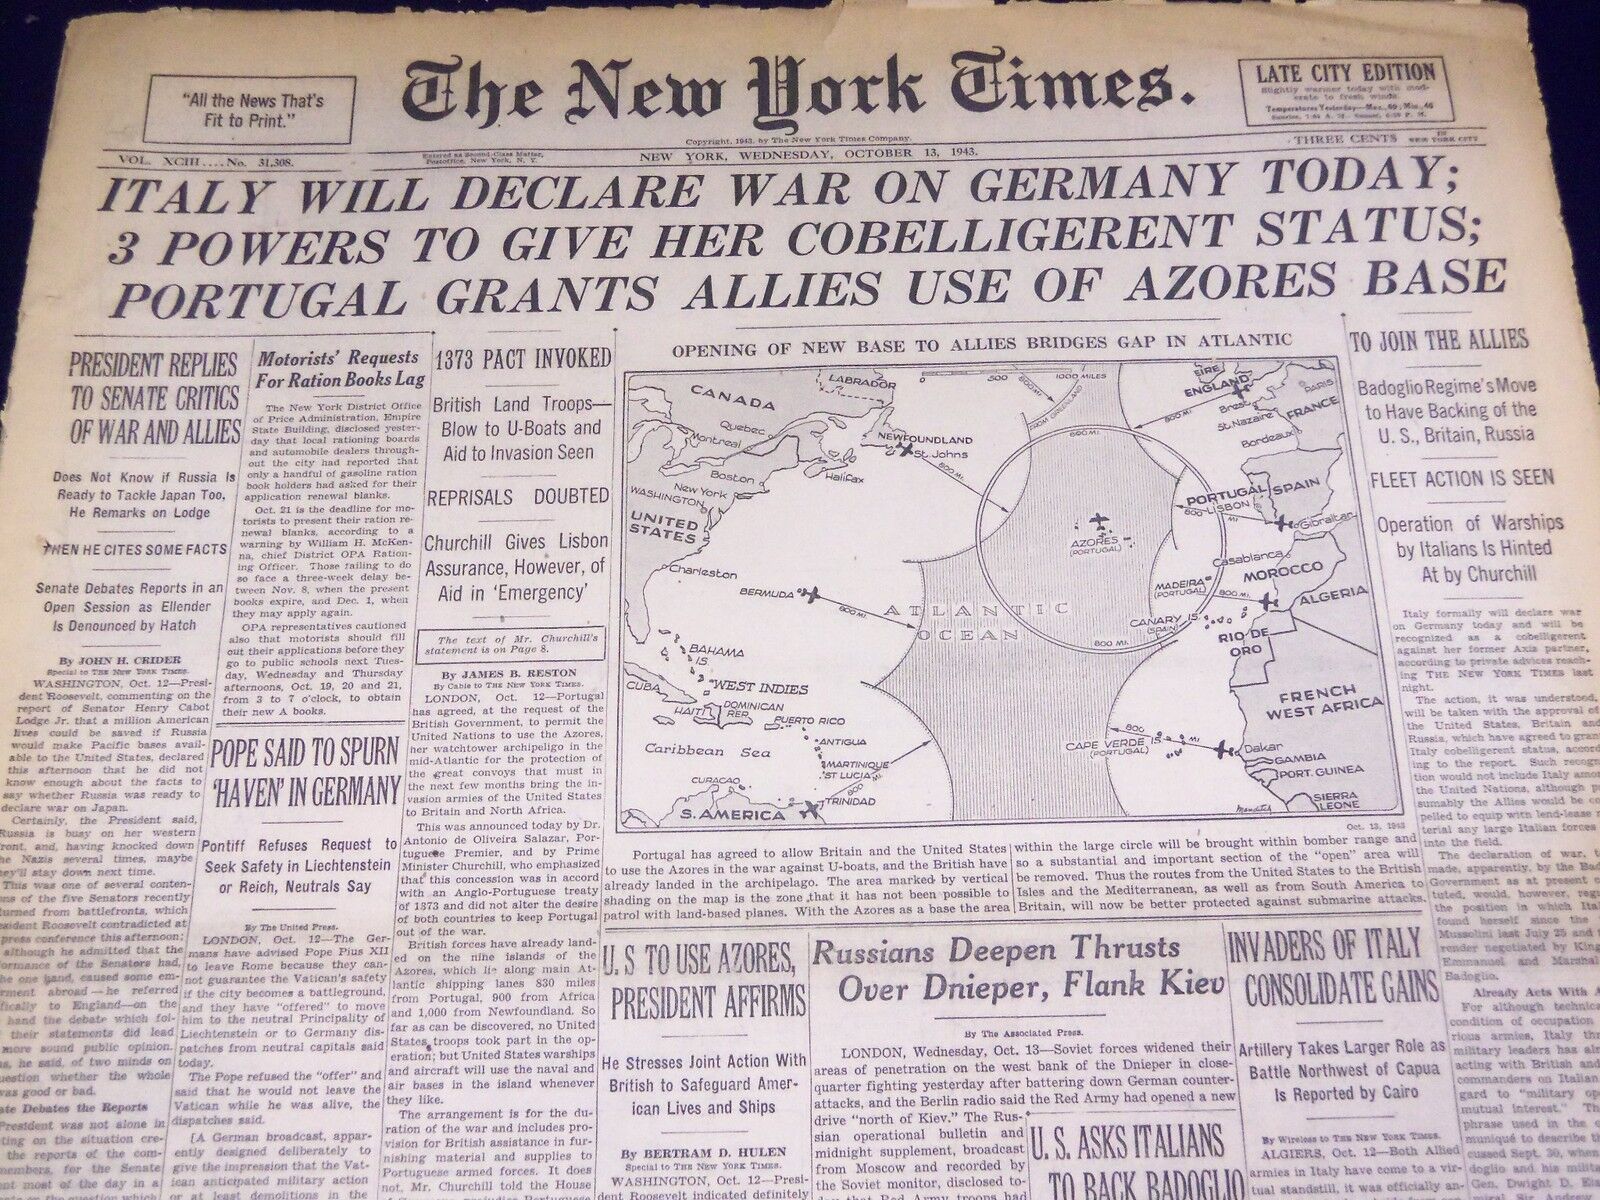 1943 OCT 13 NEW YORK TIMES - ITALY WILL DECLARE WAR ON GERMANY - NT 1908